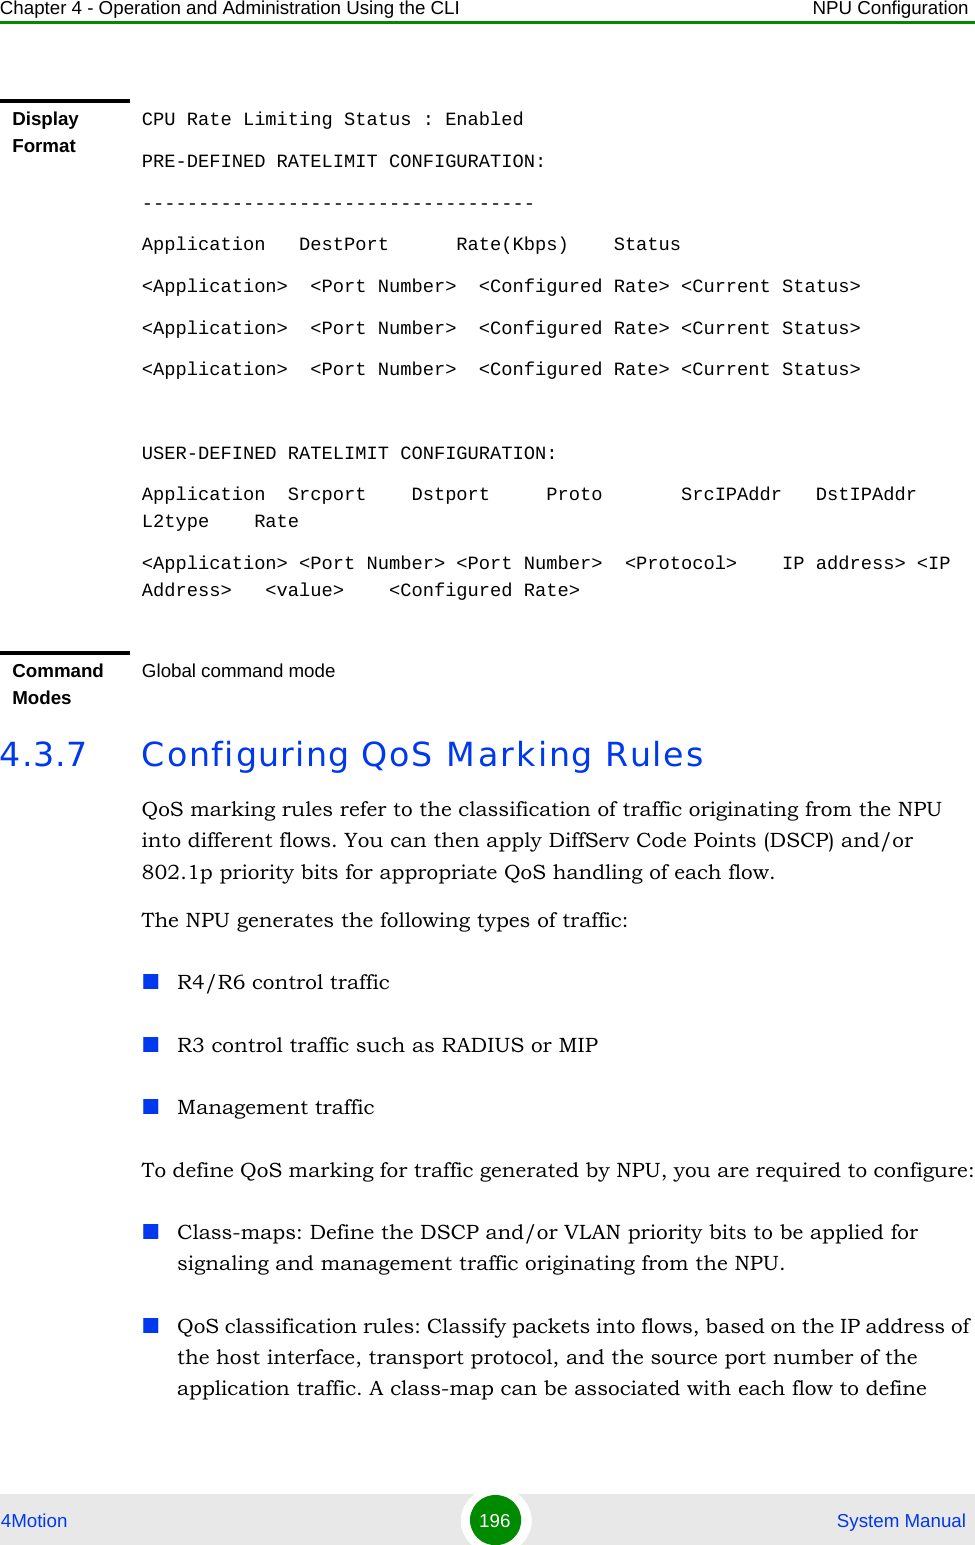 Chapter 4 - Operation and Administration Using the CLI NPU Configuration4Motion 196  System Manual4.3.7 Configuring QoS Marking RulesQoS marking rules refer to the classification of traffic originating from the NPU into different flows. You can then apply DiffServ Code Points (DSCP) and/or 802.1p priority bits for appropriate QoS handling of each flow. The NPU generates the following types of traffic:R4/R6 control trafficR3 control traffic such as RADIUS or MIPManagement traffic To define QoS marking for traffic generated by NPU, you are required to configure:Class-maps: Define the DSCP and/or VLAN priority bits to be applied for signaling and management traffic originating from the NPU.QoS classification rules: Classify packets into flows, based on the IP address of the host interface, transport protocol, and the source port number of the application traffic. A class-map can be associated with each flow to define Display FormatCPU Rate Limiting Status : EnabledPRE-DEFINED RATELIMIT CONFIGURATION:-----------------------------------Application   DestPort      Rate(Kbps)    Status&lt;Application&gt;  &lt;Port Number&gt;  &lt;Configured Rate&gt; &lt;Current Status&gt; &lt;Application&gt;  &lt;Port Number&gt;  &lt;Configured Rate&gt; &lt;Current Status&gt; &lt;Application&gt;  &lt;Port Number&gt;  &lt;Configured Rate&gt; &lt;Current Status&gt; USER-DEFINED RATELIMIT CONFIGURATION:Application  Srcport    Dstport     Proto       SrcIPAddr   DstIPAddr    L2type    Rate&lt;Application&gt; &lt;Port Number&gt; &lt;Port Number&gt;  &lt;Protocol&gt;    IP address&gt; &lt;IP Address&gt;   &lt;value&gt;    &lt;Configured Rate&gt;Command ModesGlobal command mode